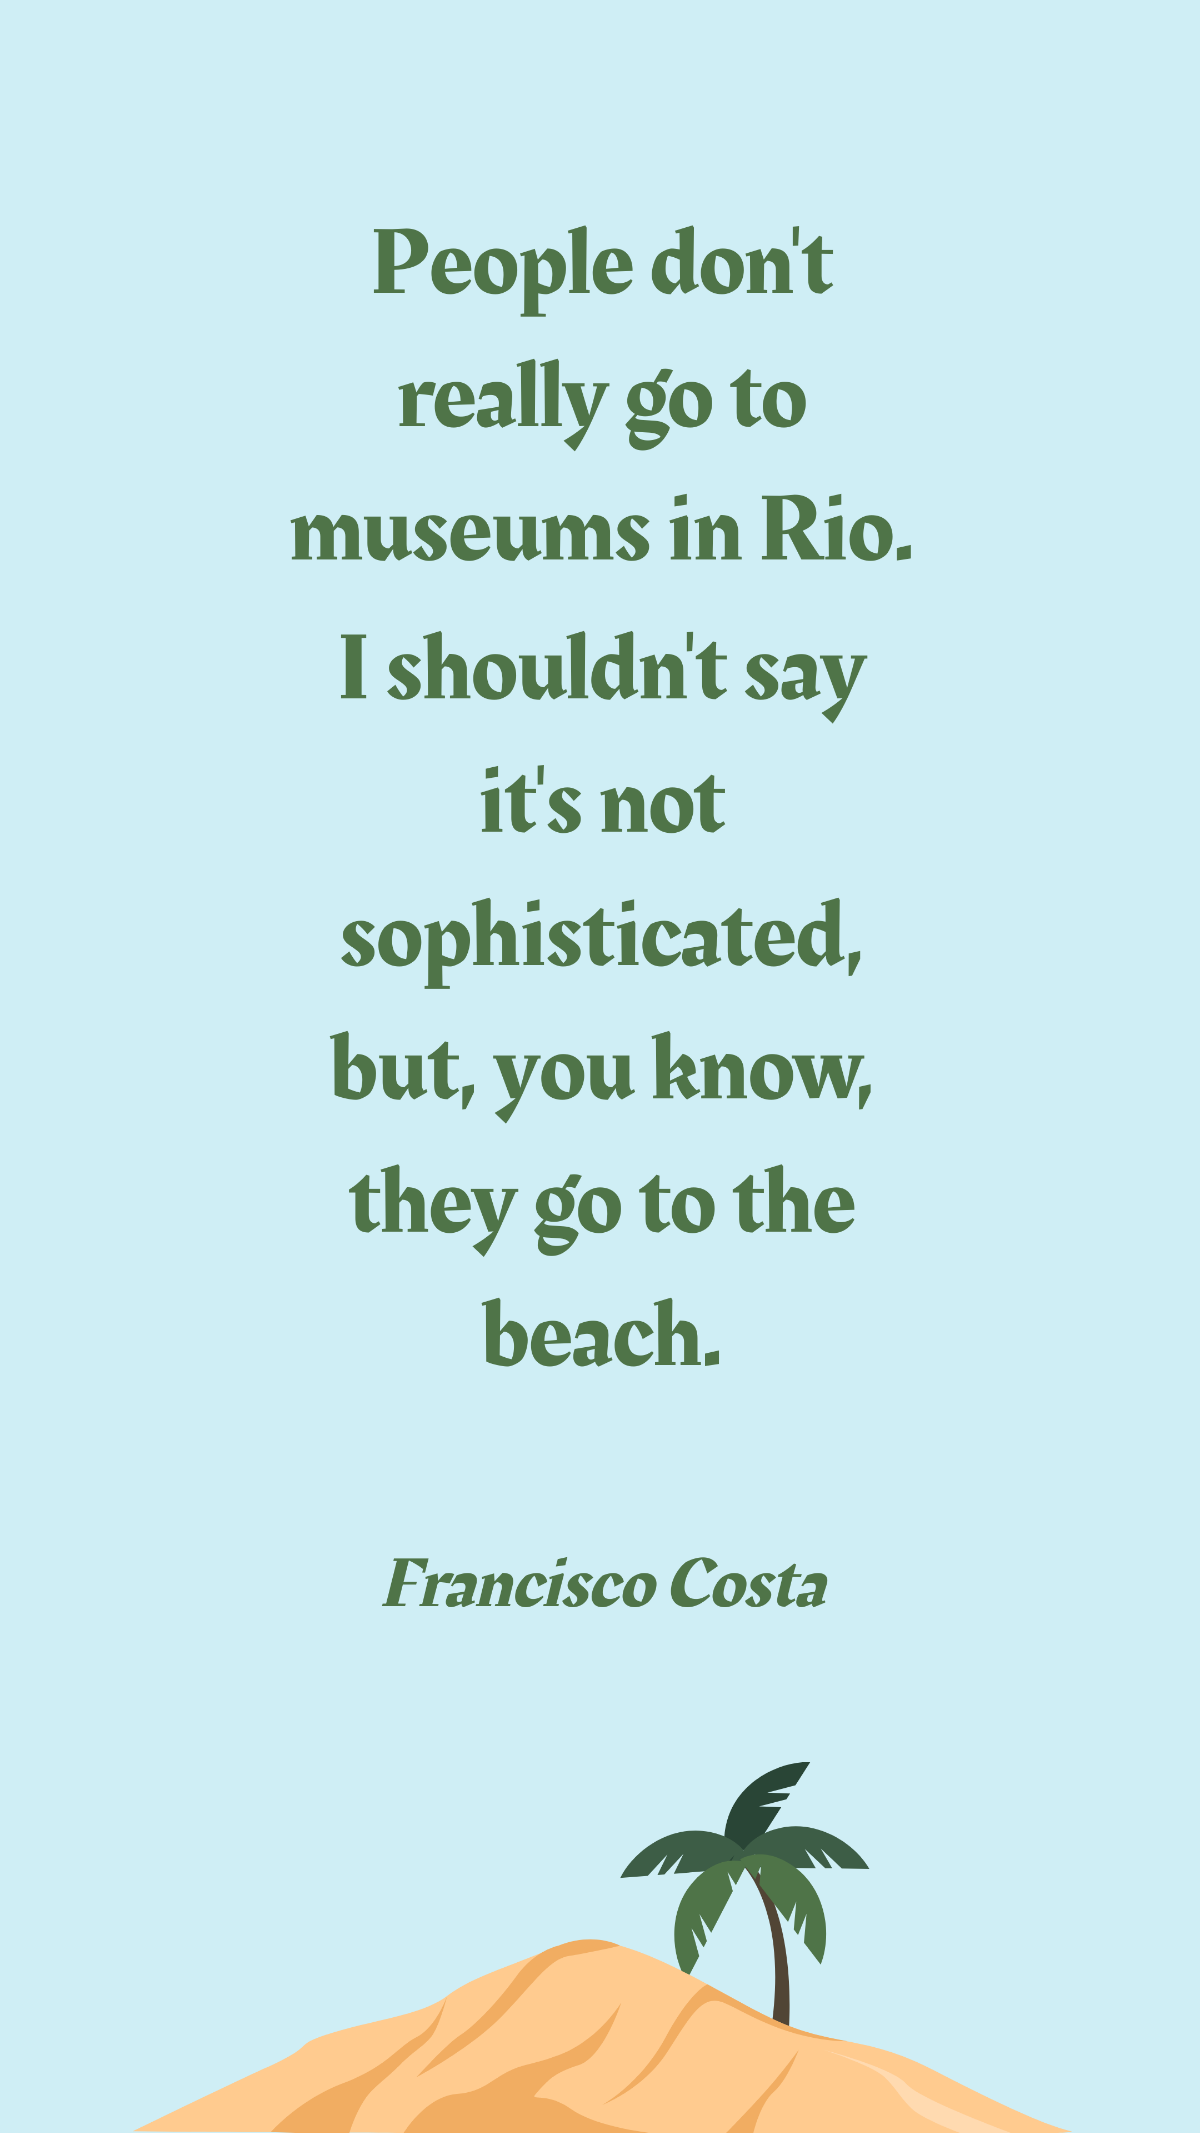 Free Francisco Costa - People don't really go to museums in Rio. I shouldn't say it's not sophisticated, but, you know, they go to the beach. Template